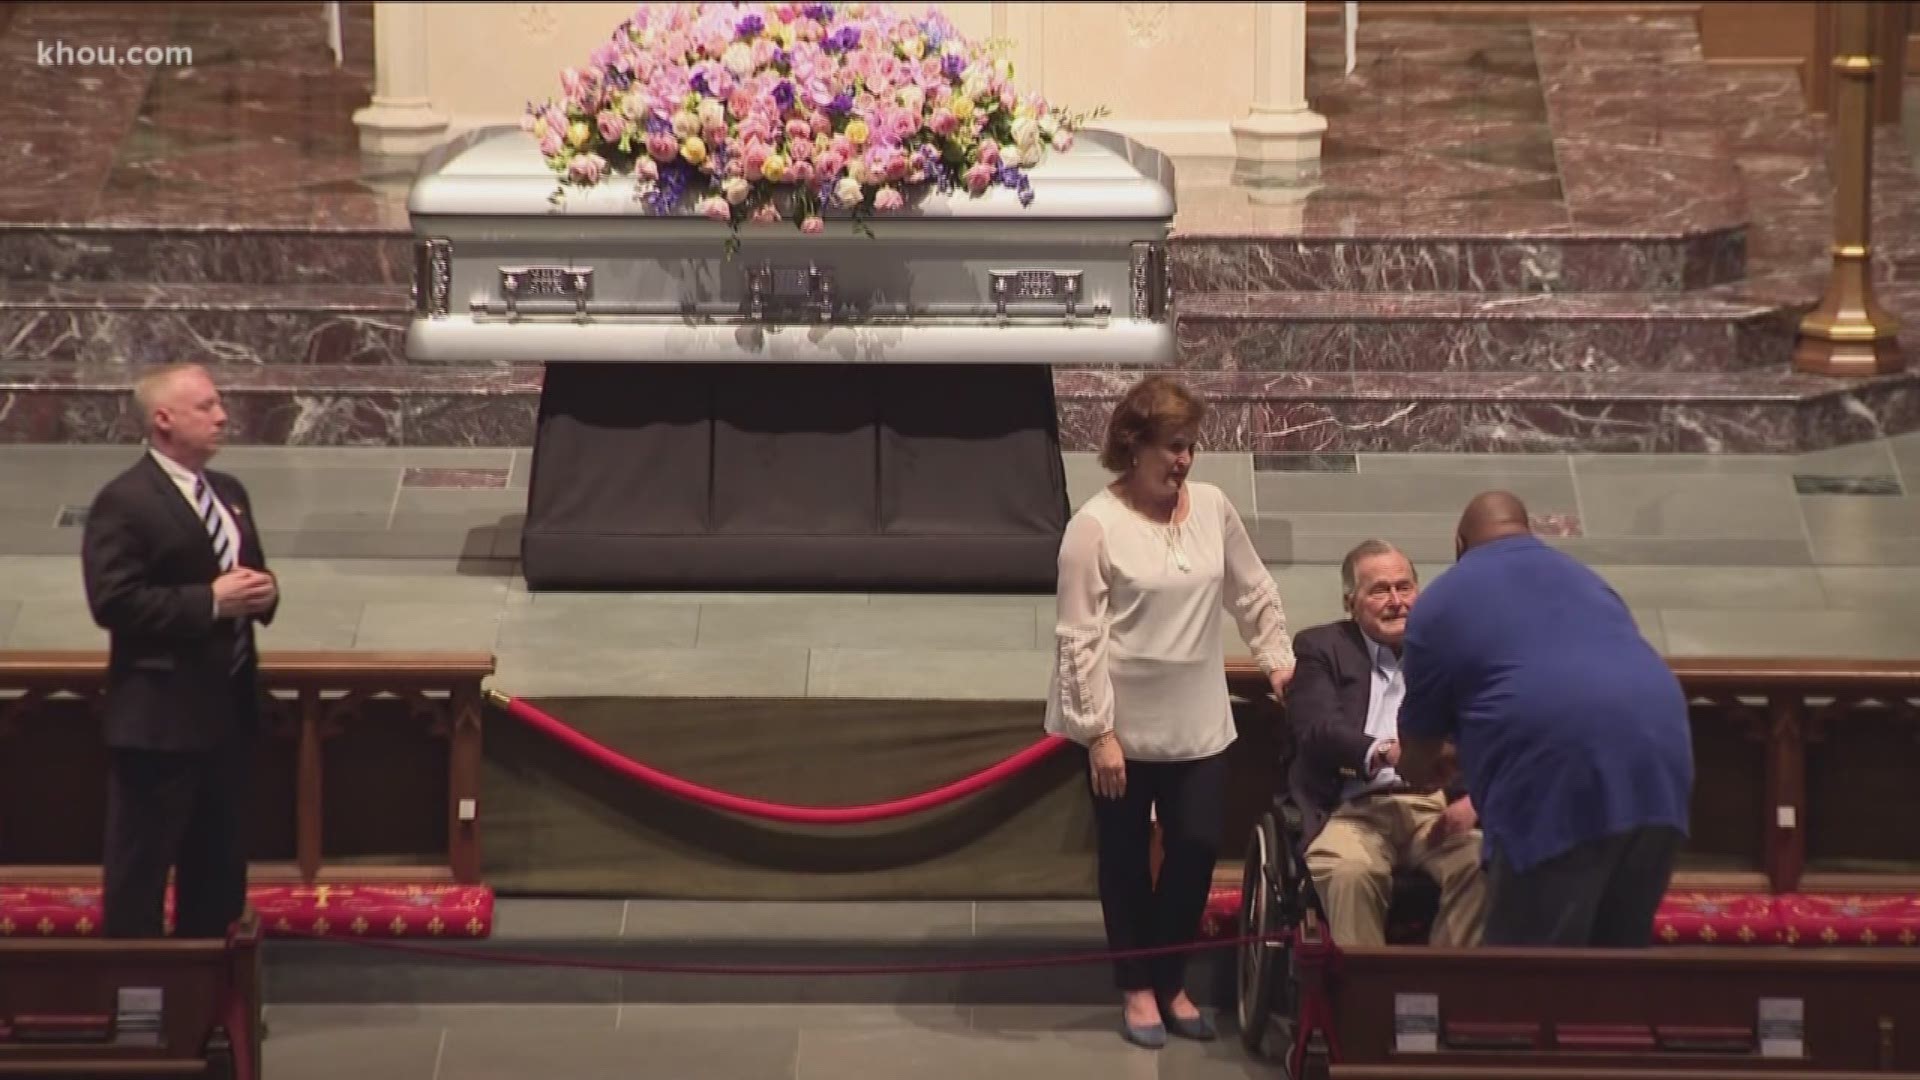 President George H.W. Bush greets those offering their condolences at the visitation for former first lady Barbara Bush.